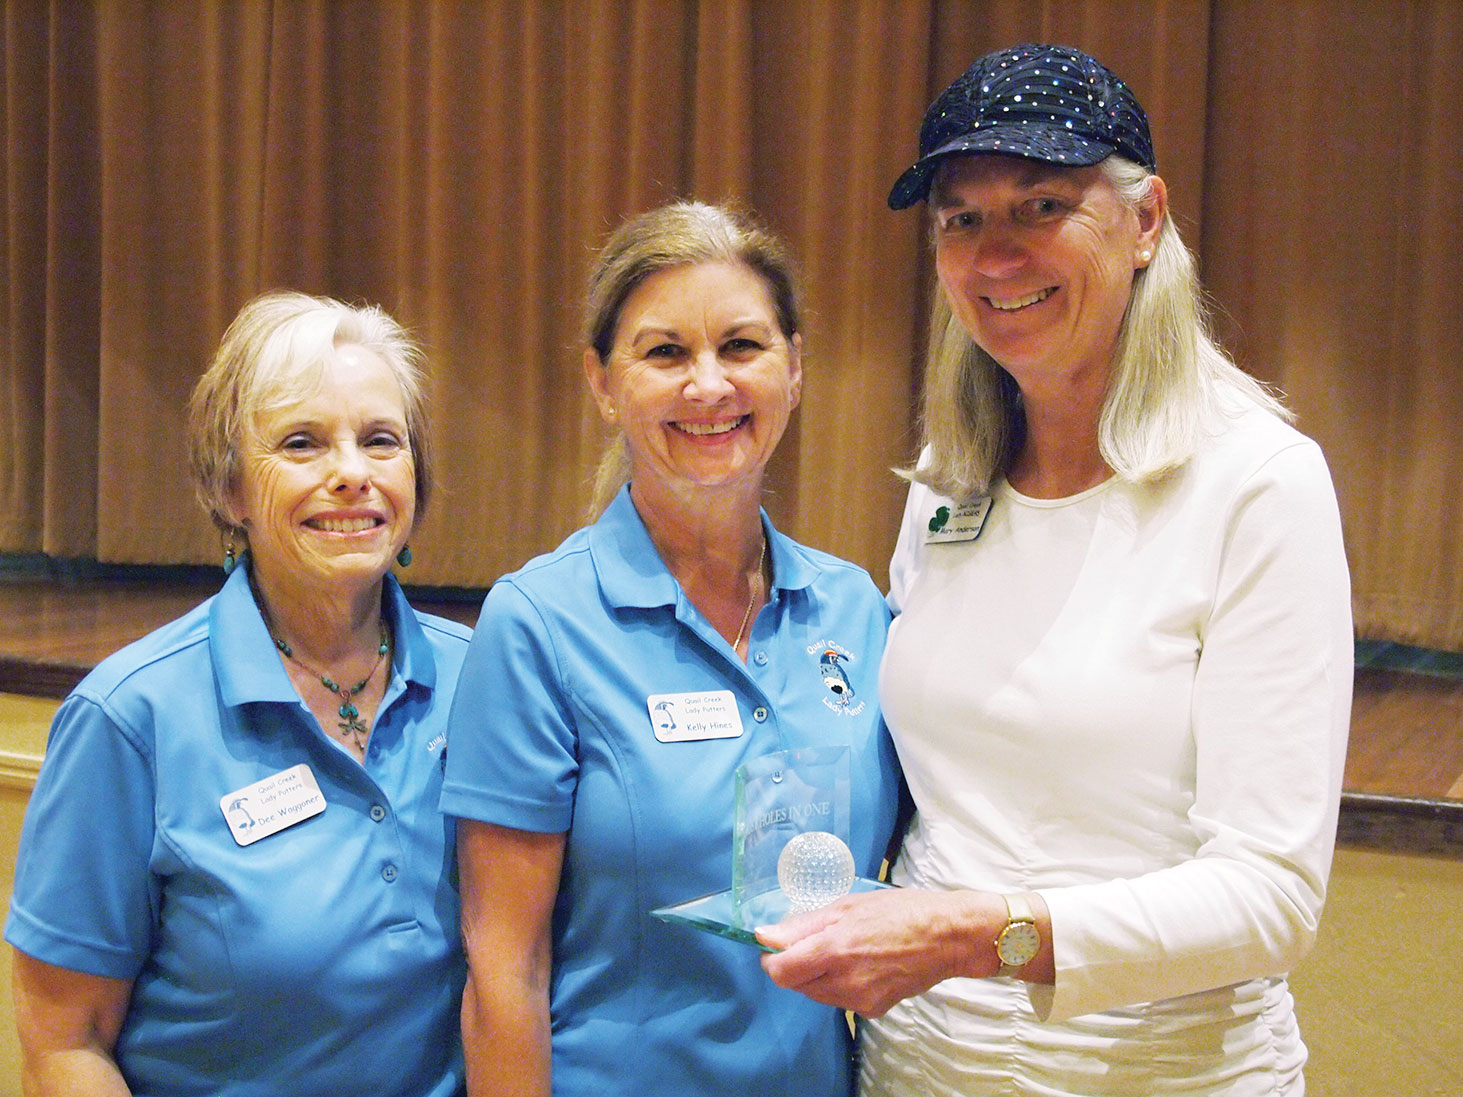 Left to right: Past President Dee Waggoner presents the Coveted Quail to Nancy Resnick for having the lowest net score for the six week period while Vice President Kelly Hines looks on; photo by Sylvia Butler.